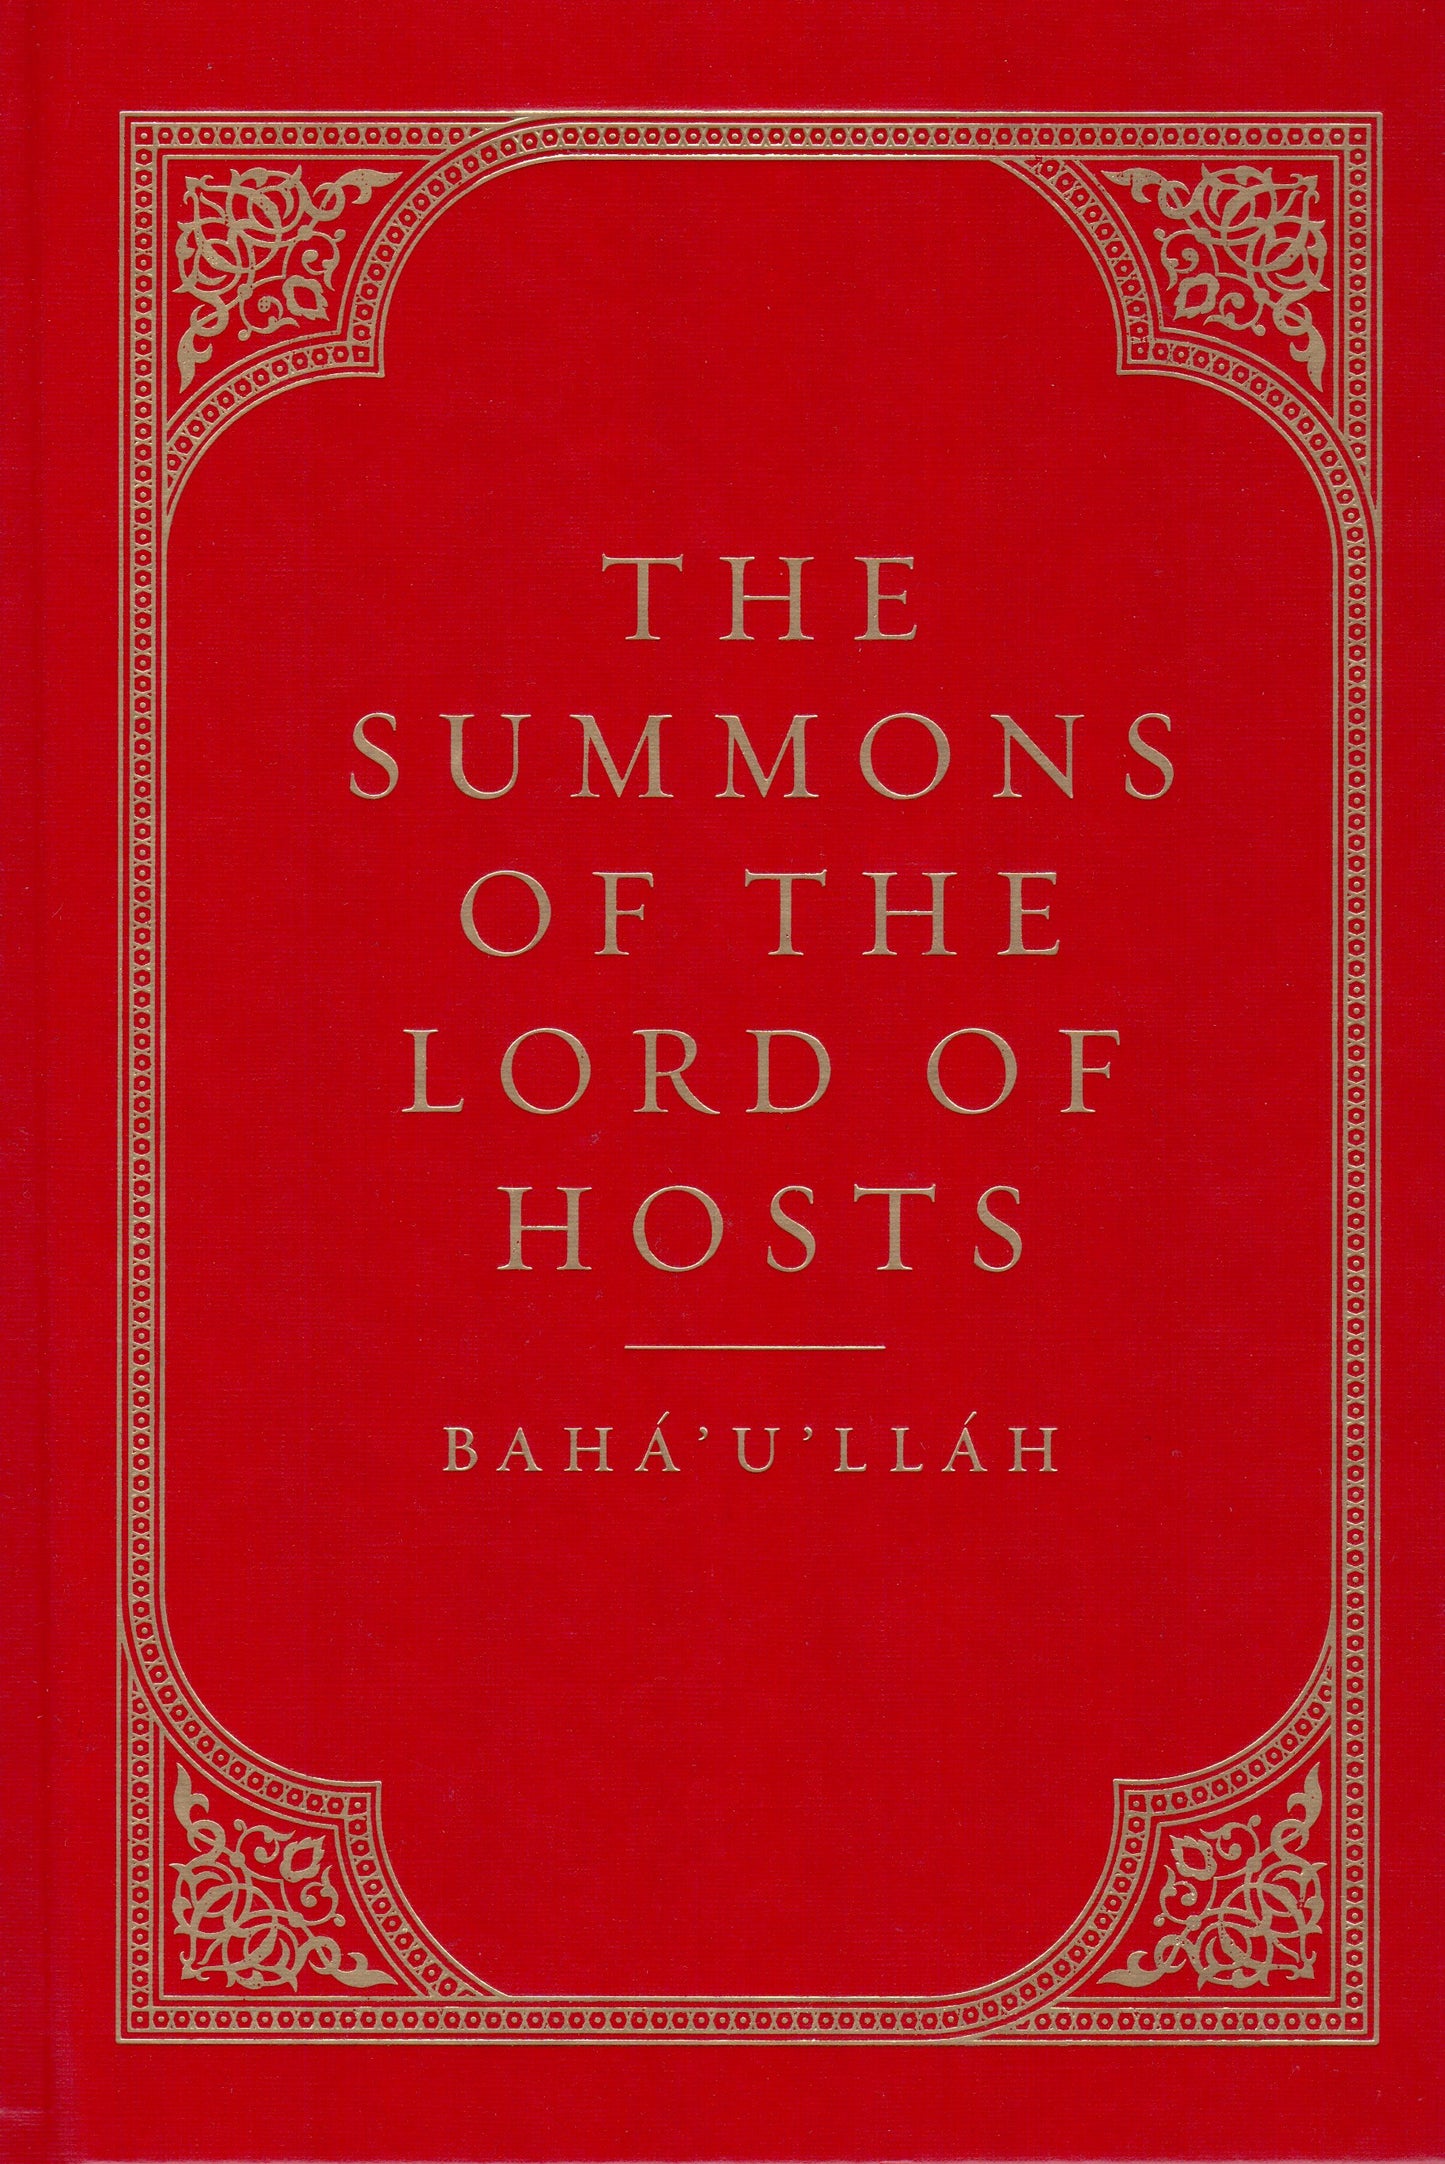 Summons of the Lord of Hosts, The